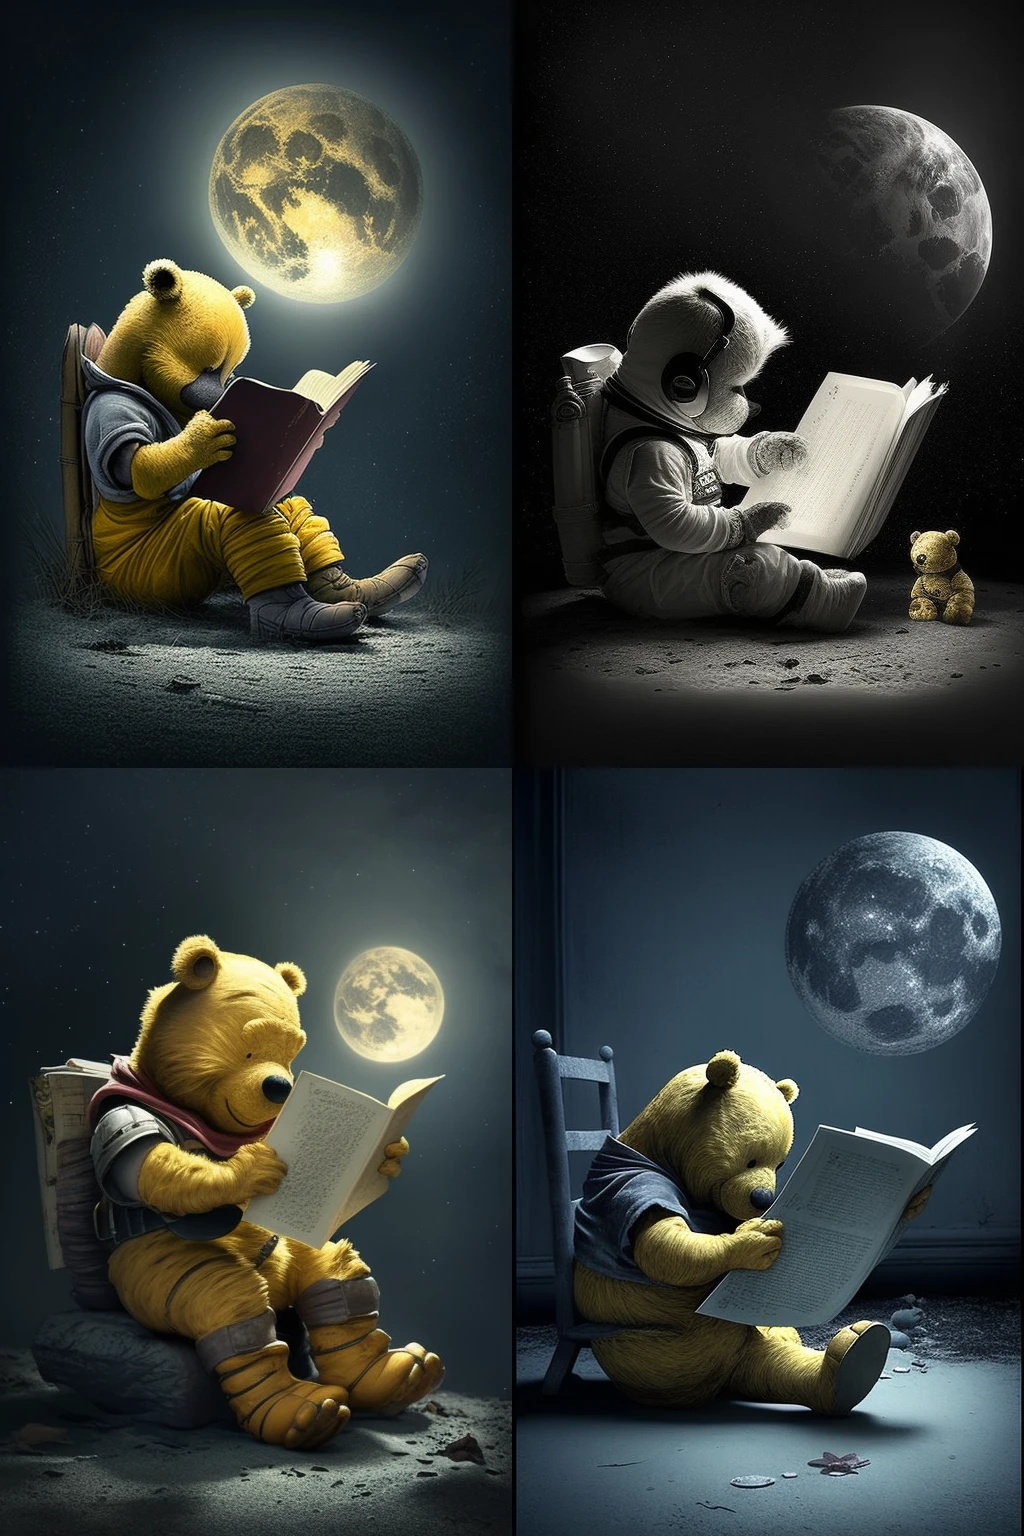 (c)_naz_medeo_first_vinny-the-pooh_reading_the_book_on_the_moo_e3d2889f-1fd7-4266-bd54-97a10e89be8f